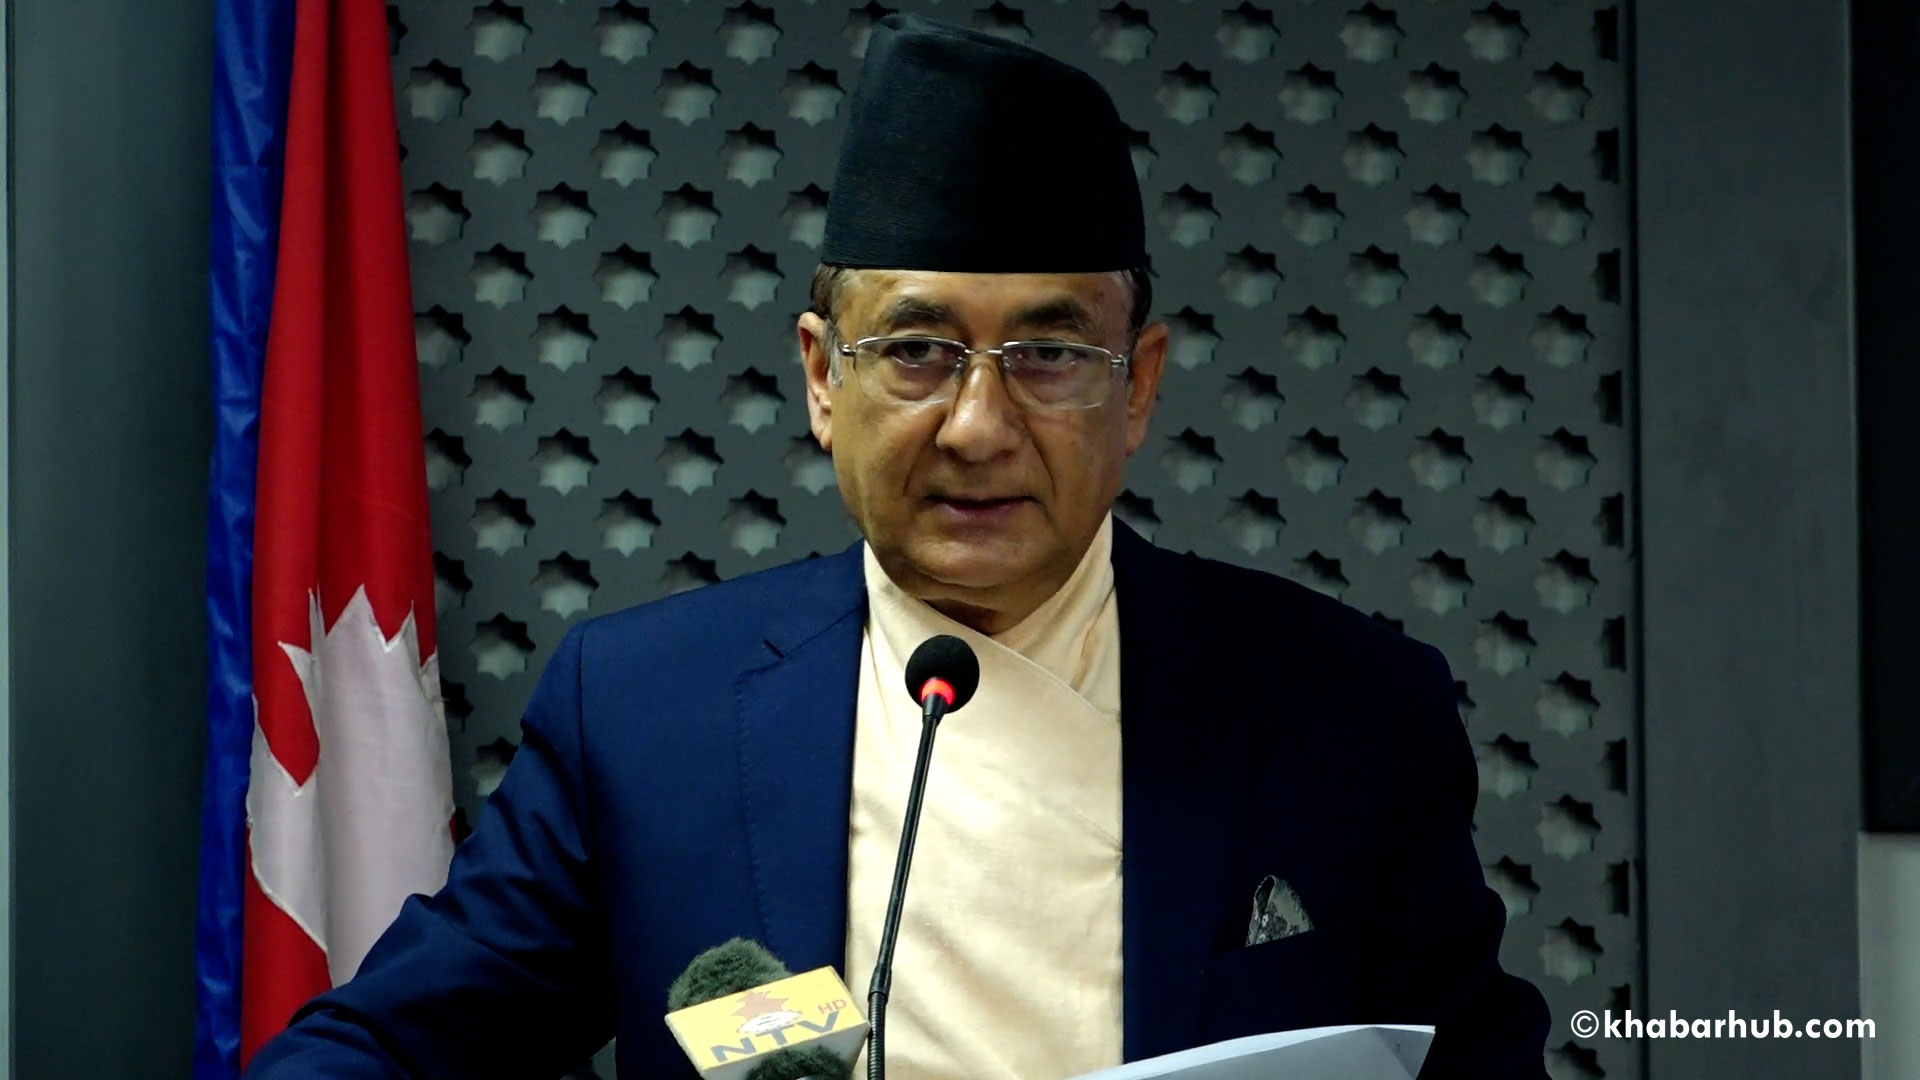 Digital payment government’s top priority: Communications Minister Karki